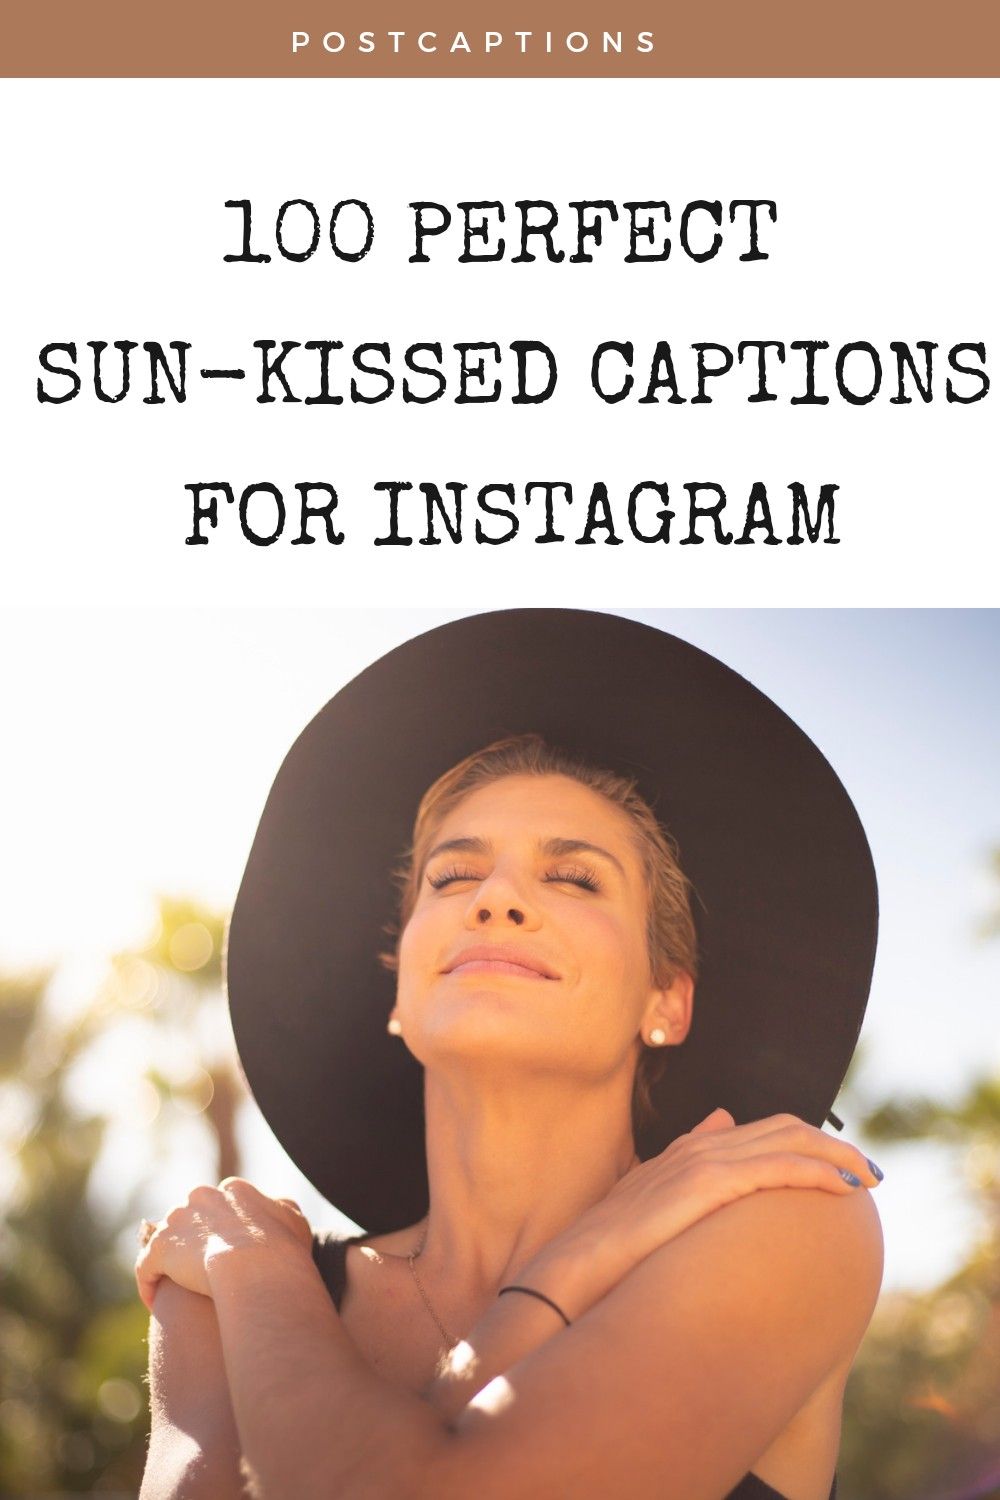 Funny Captions About Sun